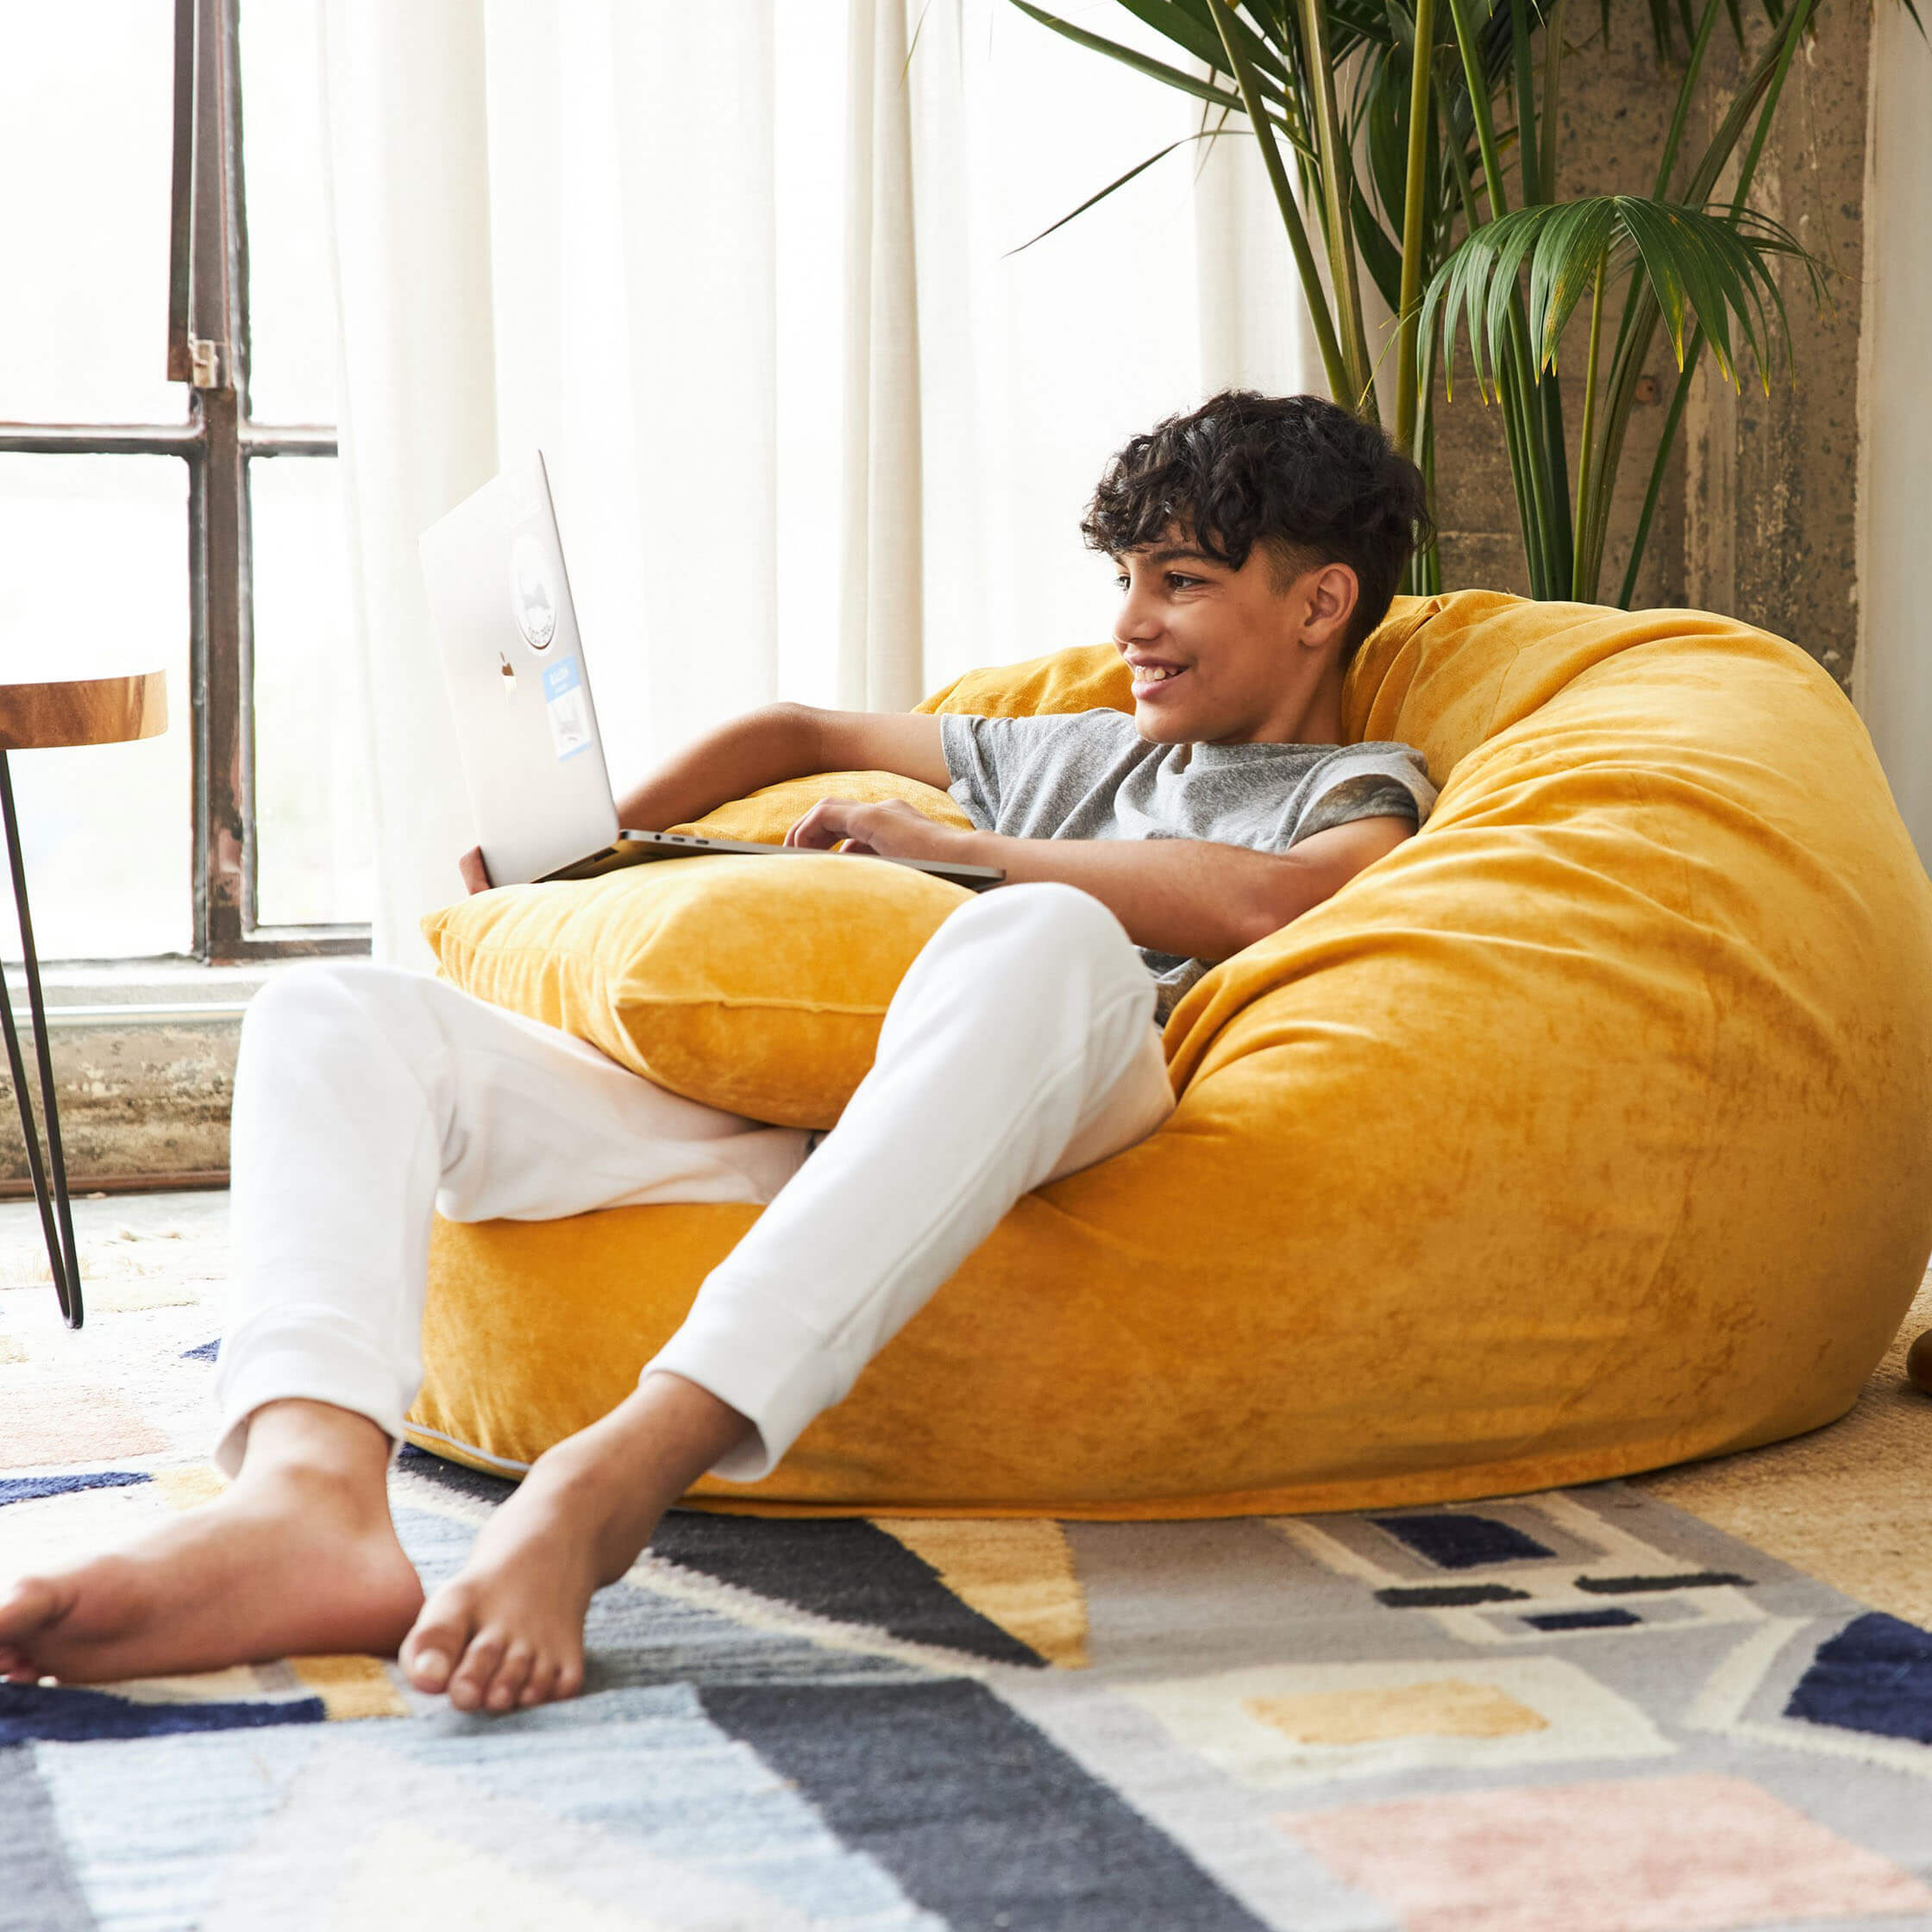 Brentwood Home REPREVE bean bag lounger: earth friendly and fun